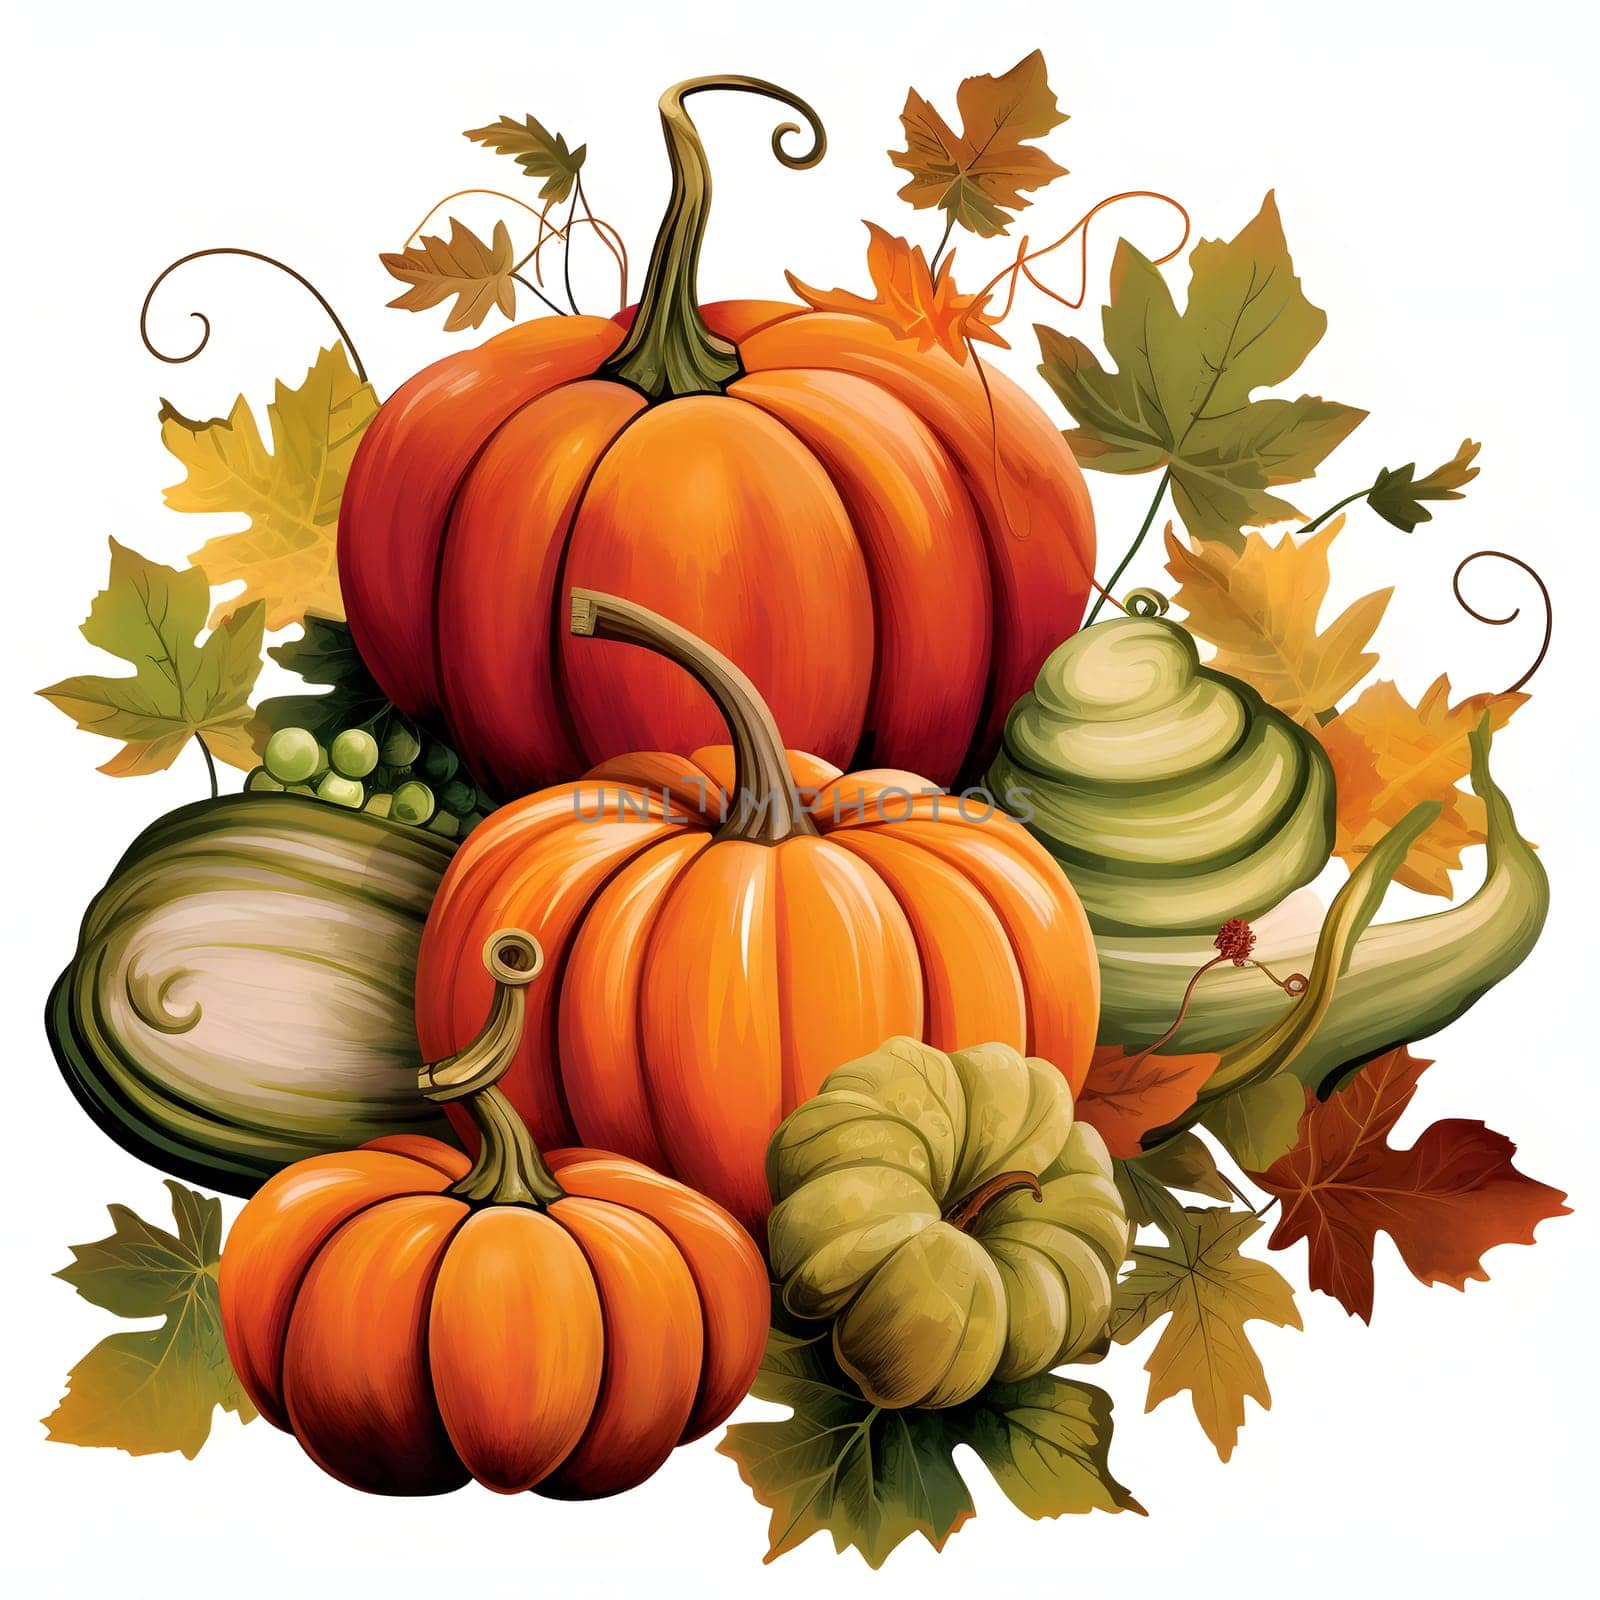 Illustration of pumpkins and autumn leaves. Pumpkin as a dish of thanksgiving for the harvest, picture on a white isolated background. Atmosphere of joy and celebration.